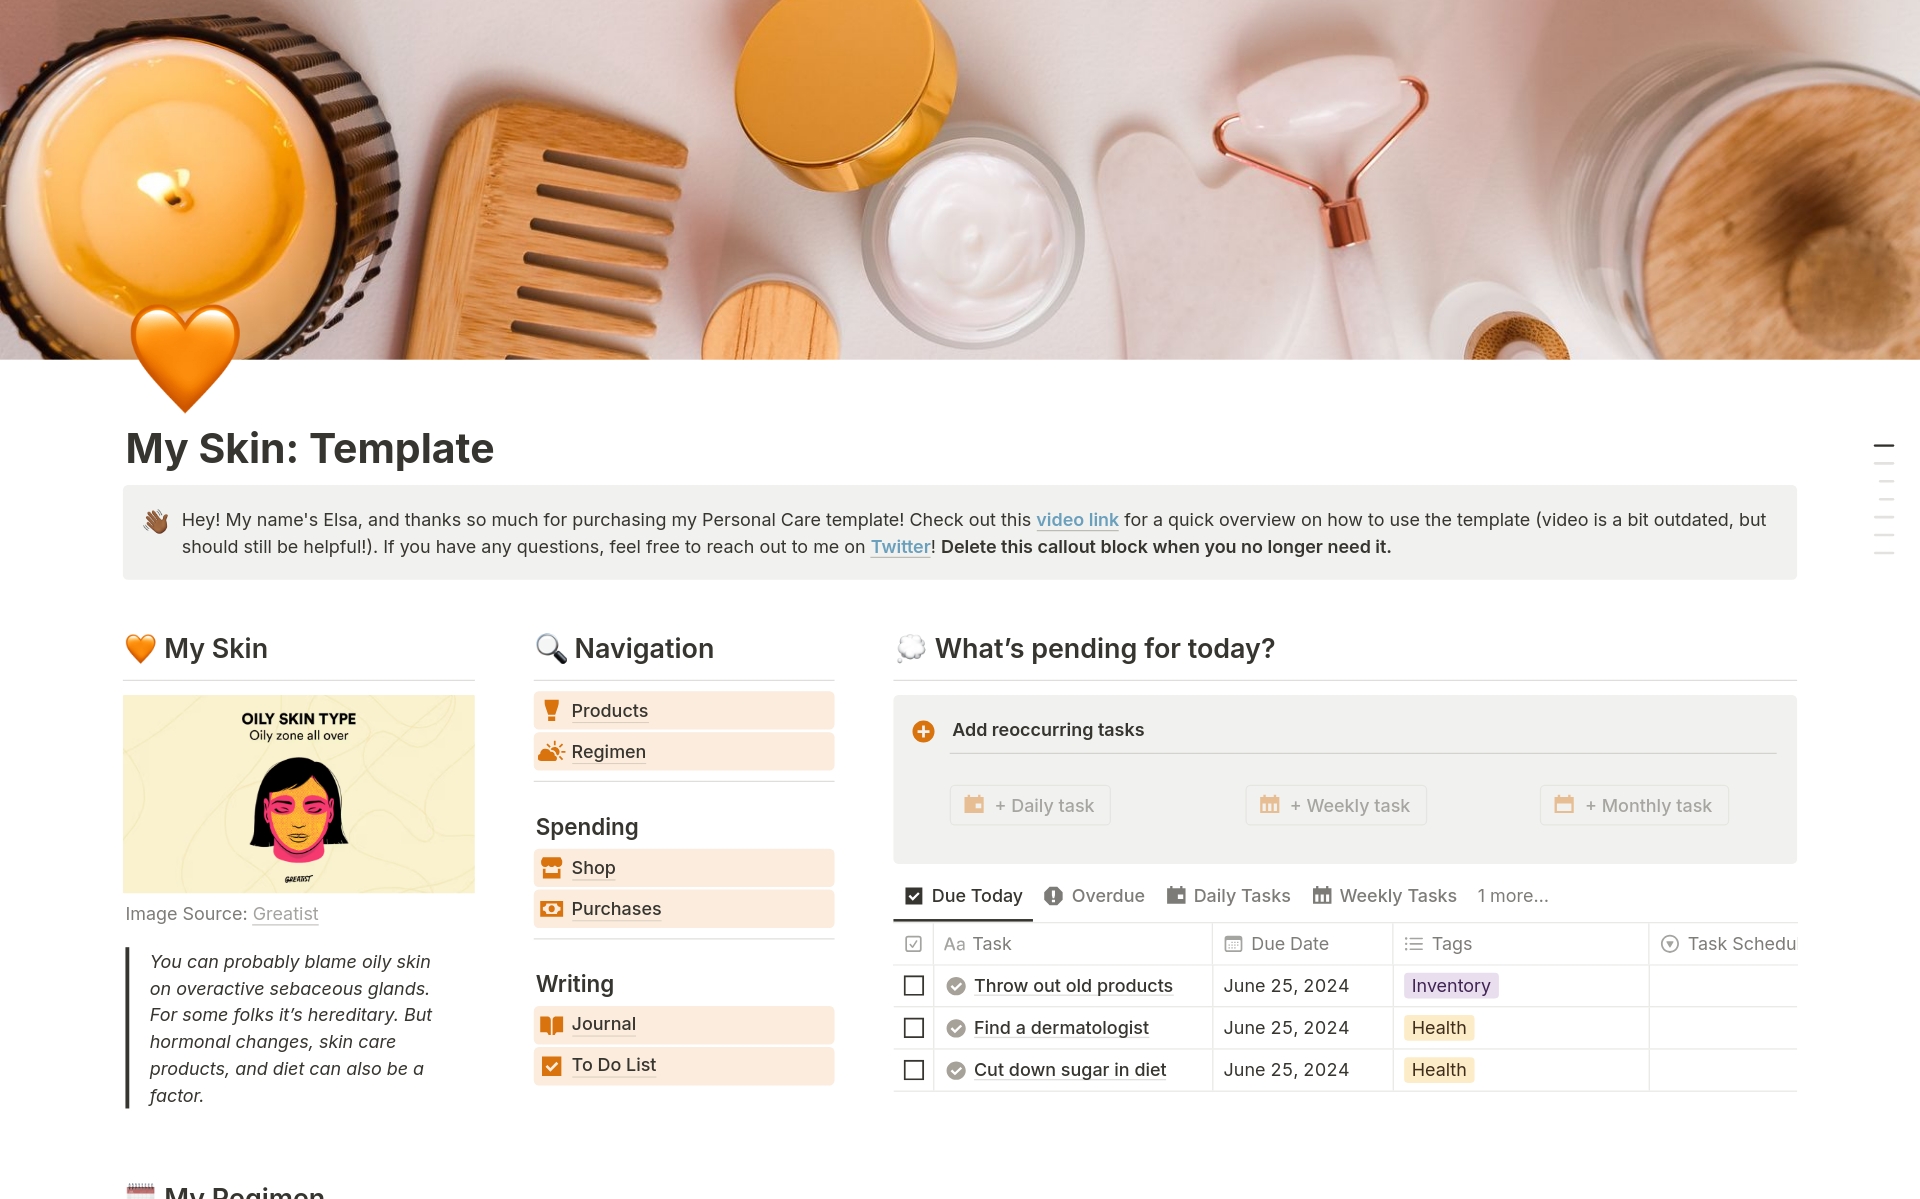 Manage your skincare with the Personal Care Template! ✨💖 Track past and current products, maintain your morning and evening routines, journal your skin's progress, and monitor your spending. Stay organized and financially savvy while optimizing your skincare routine.